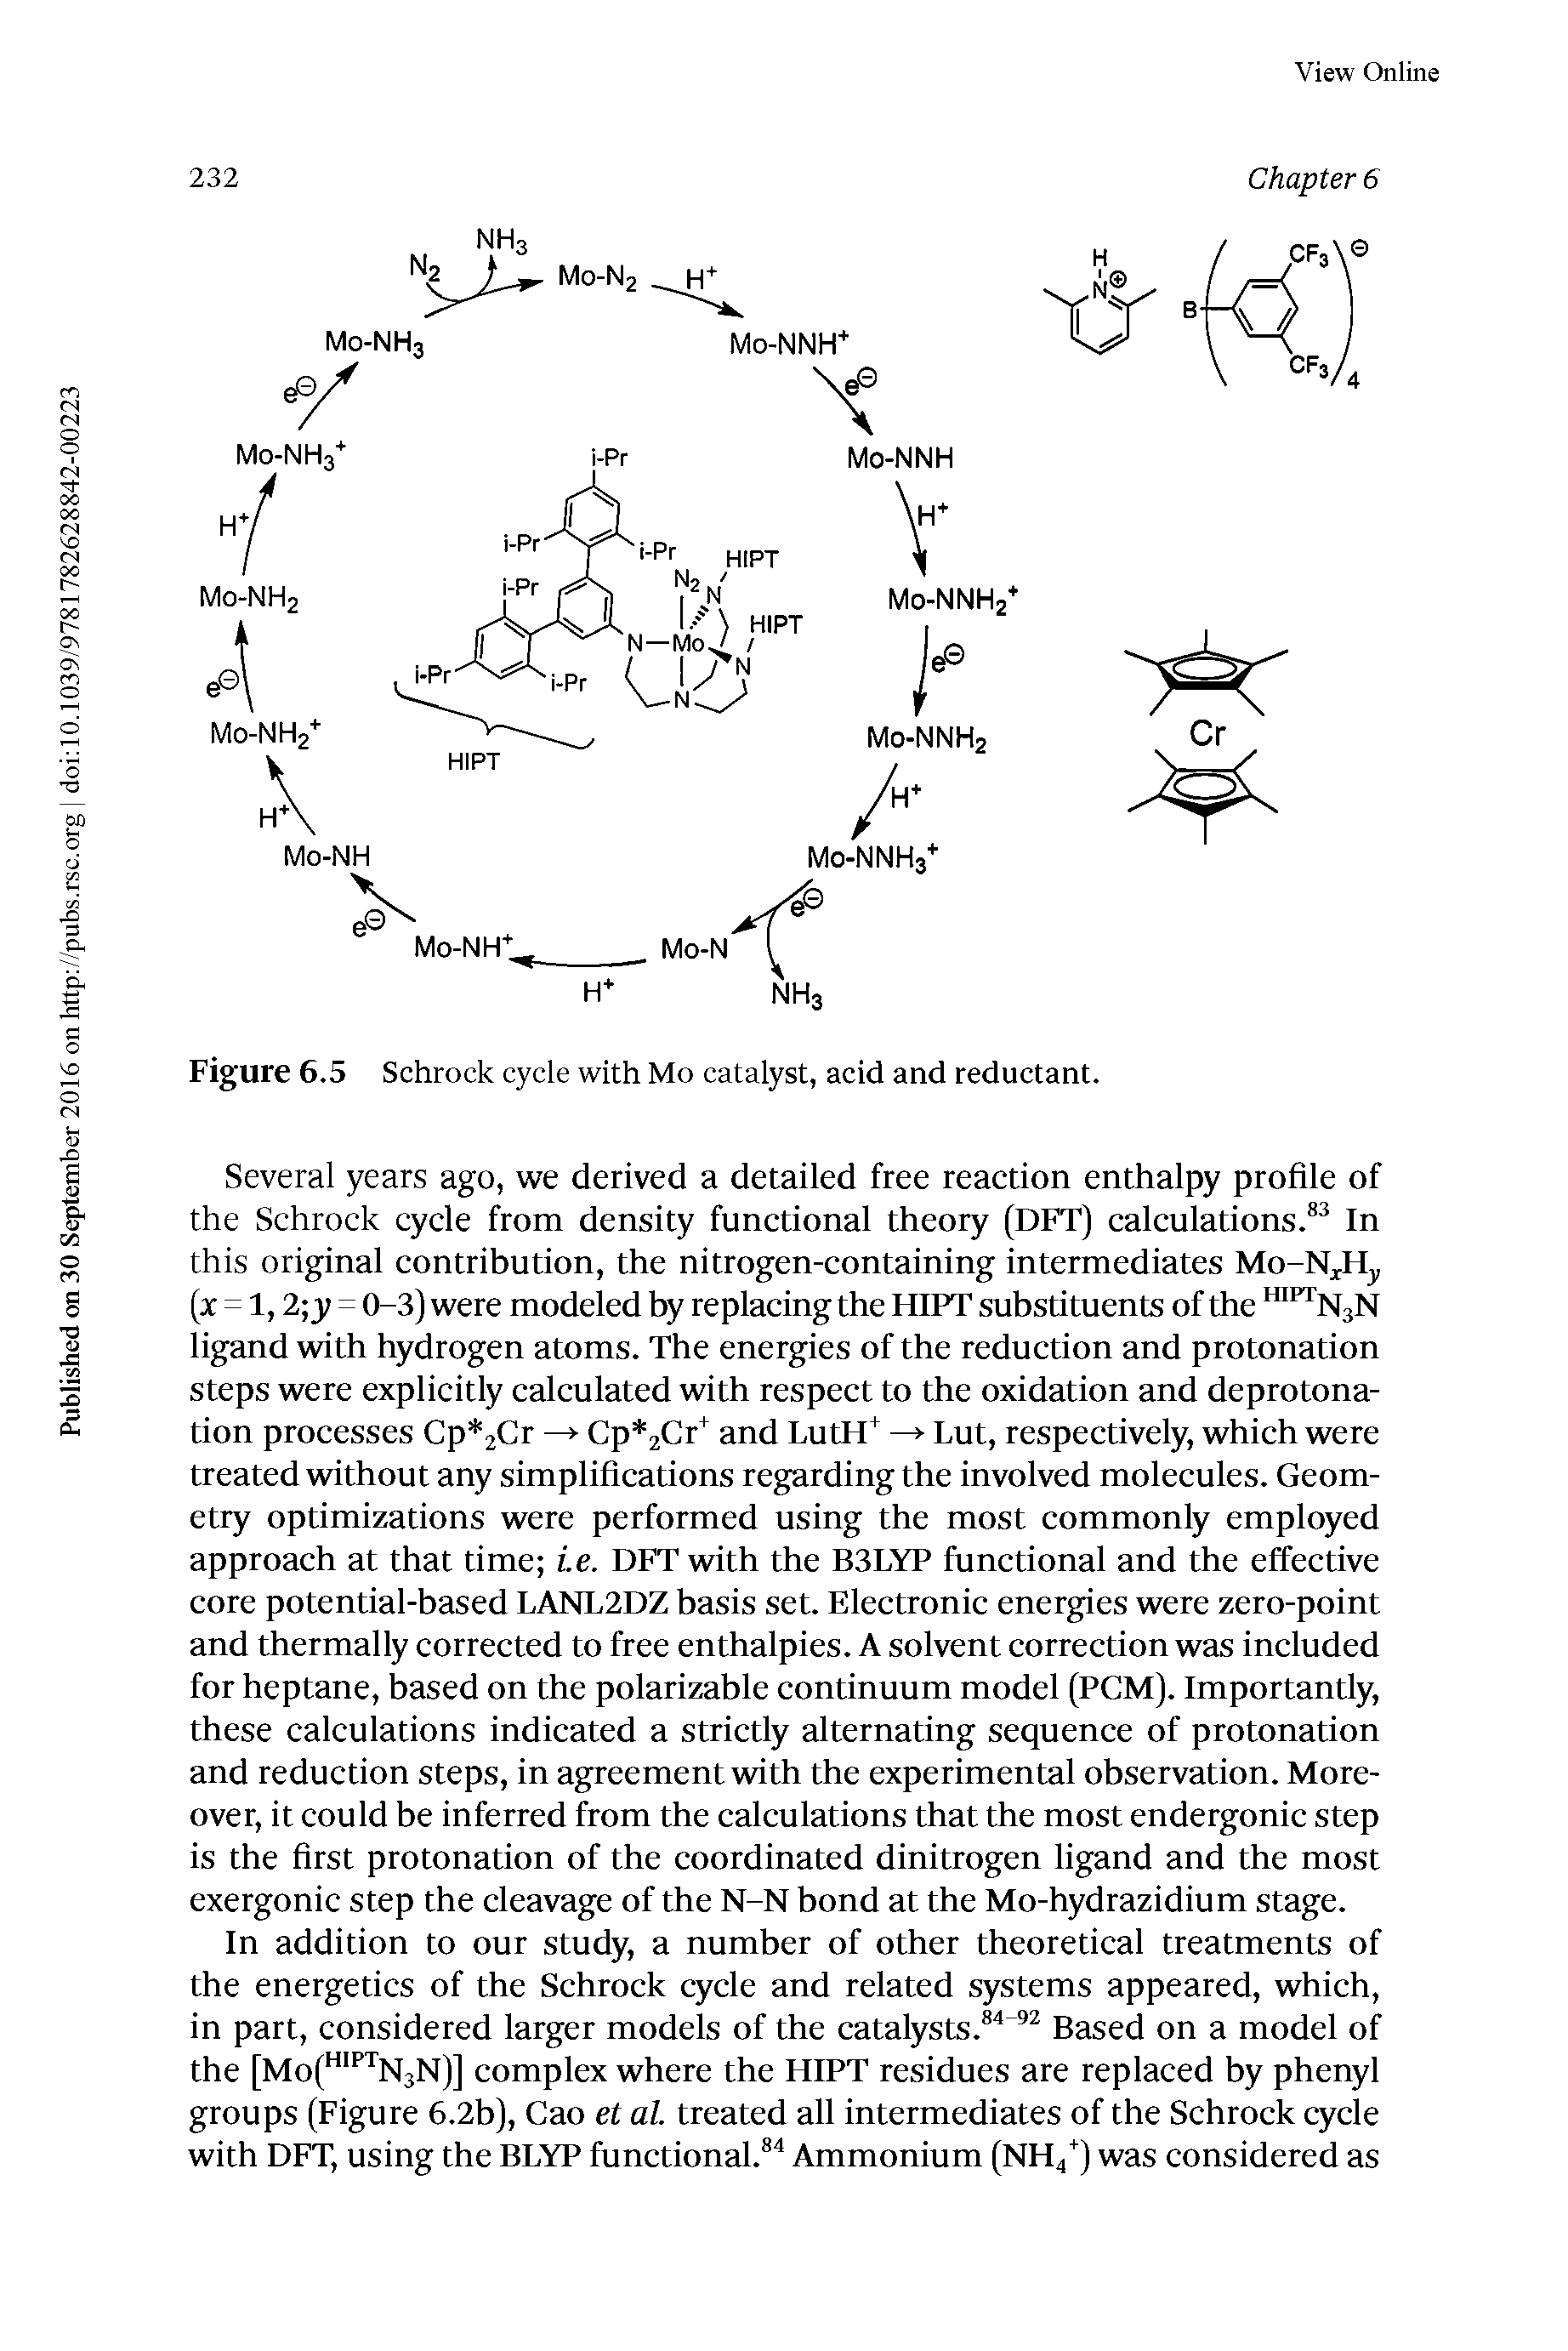 Figure 6.5 Schrock cycle with Mo catalyst, acid and reductant.